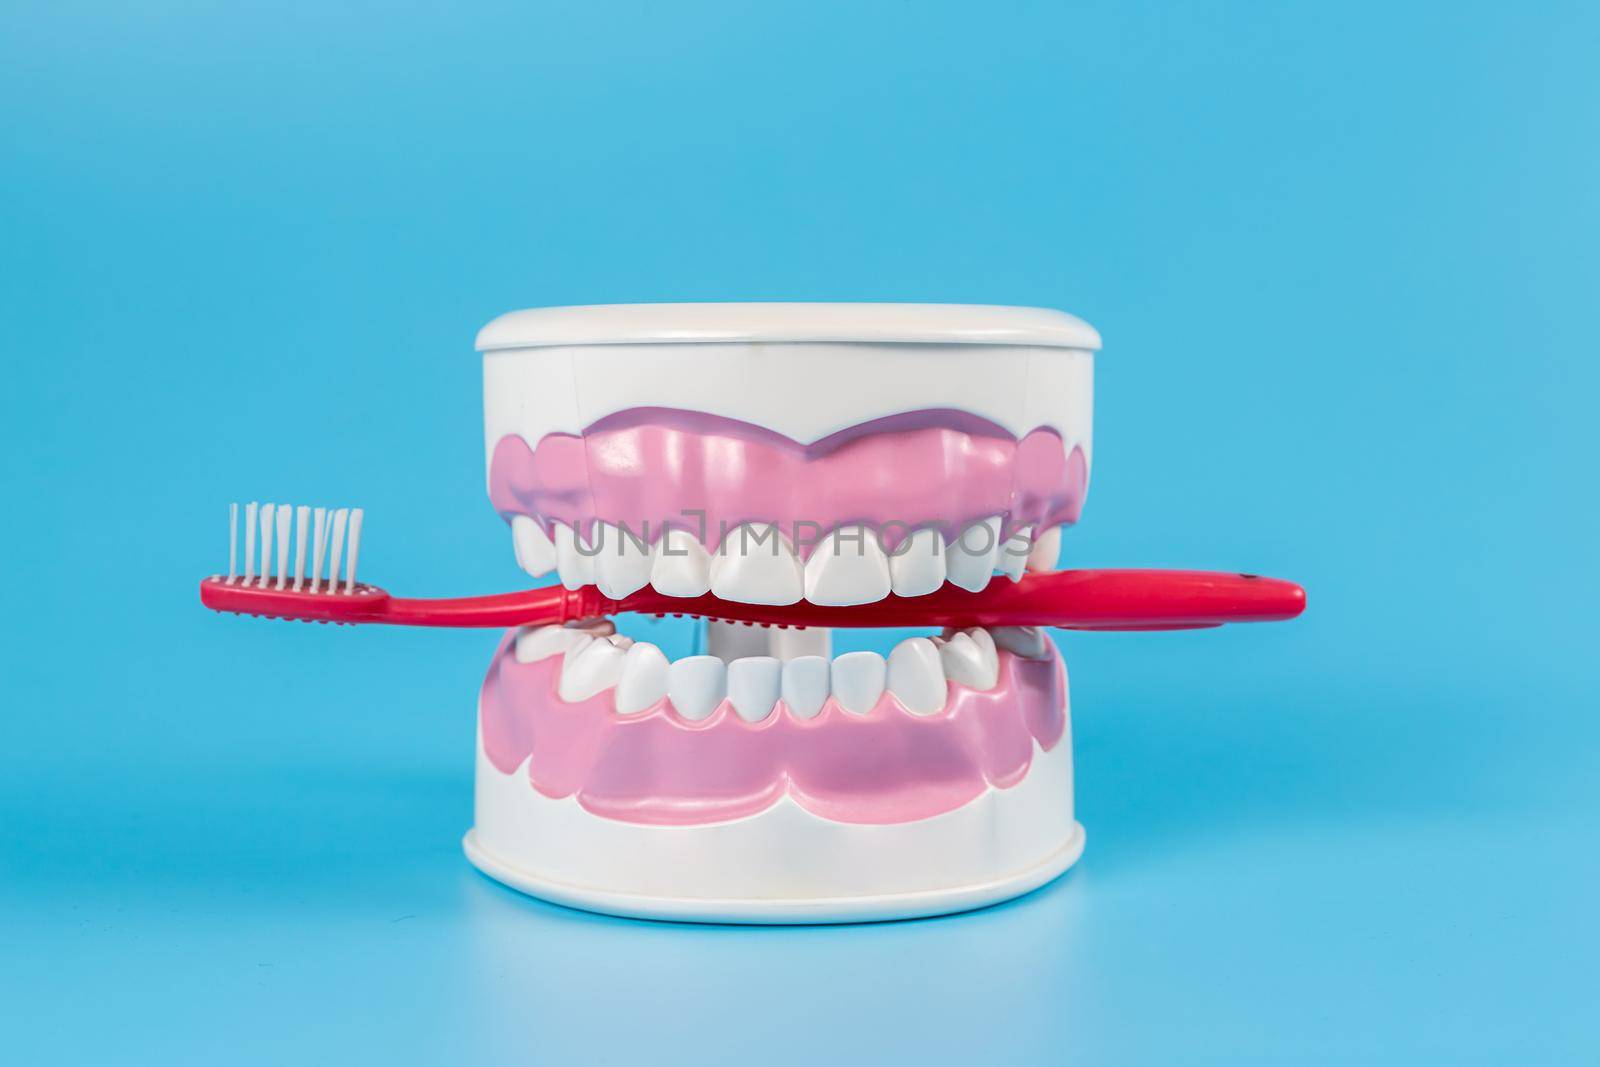 Clean teeth dental jaw model and red thooth brush on blue background. by galinasharapova